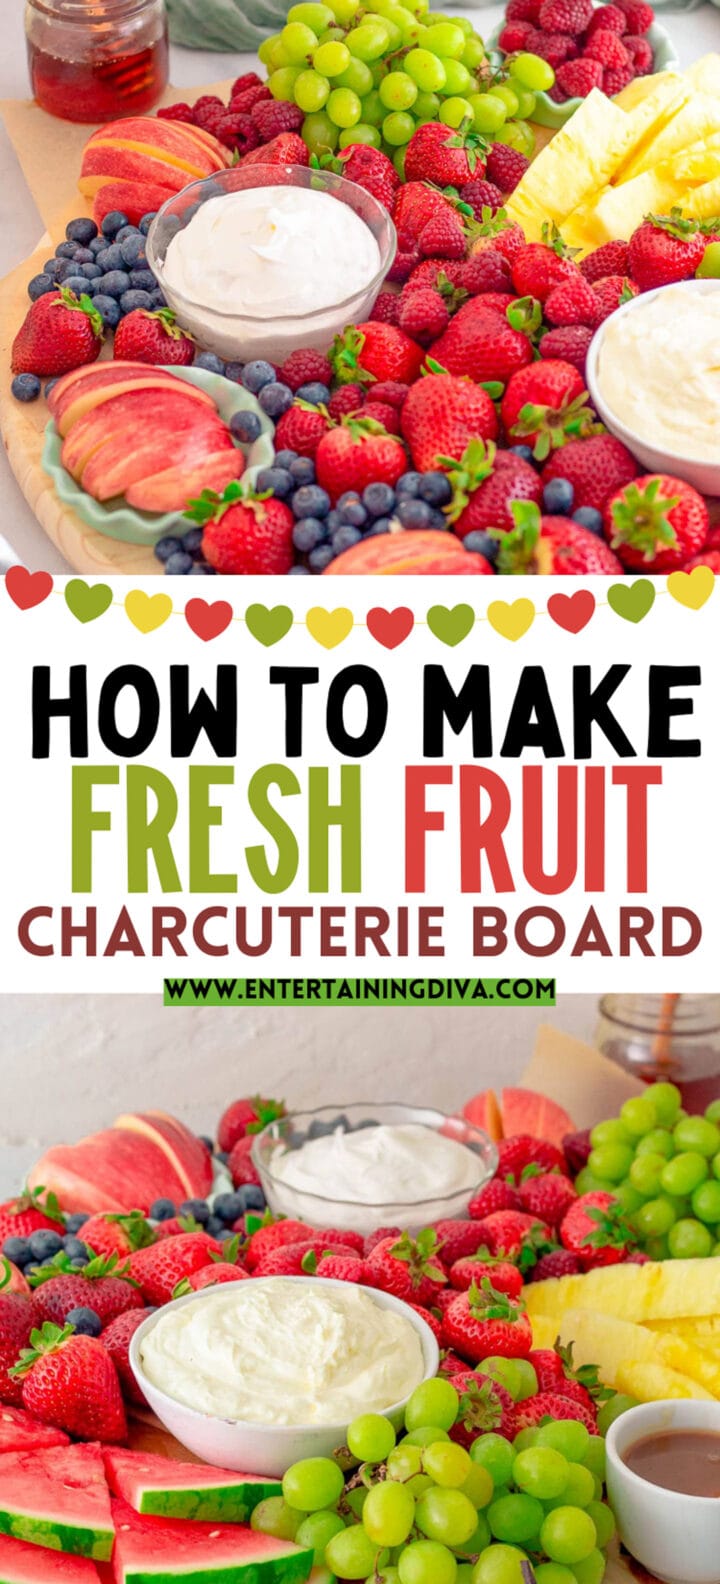 How to Make A Fresh Fruit Charcuterie Board With Strawberries